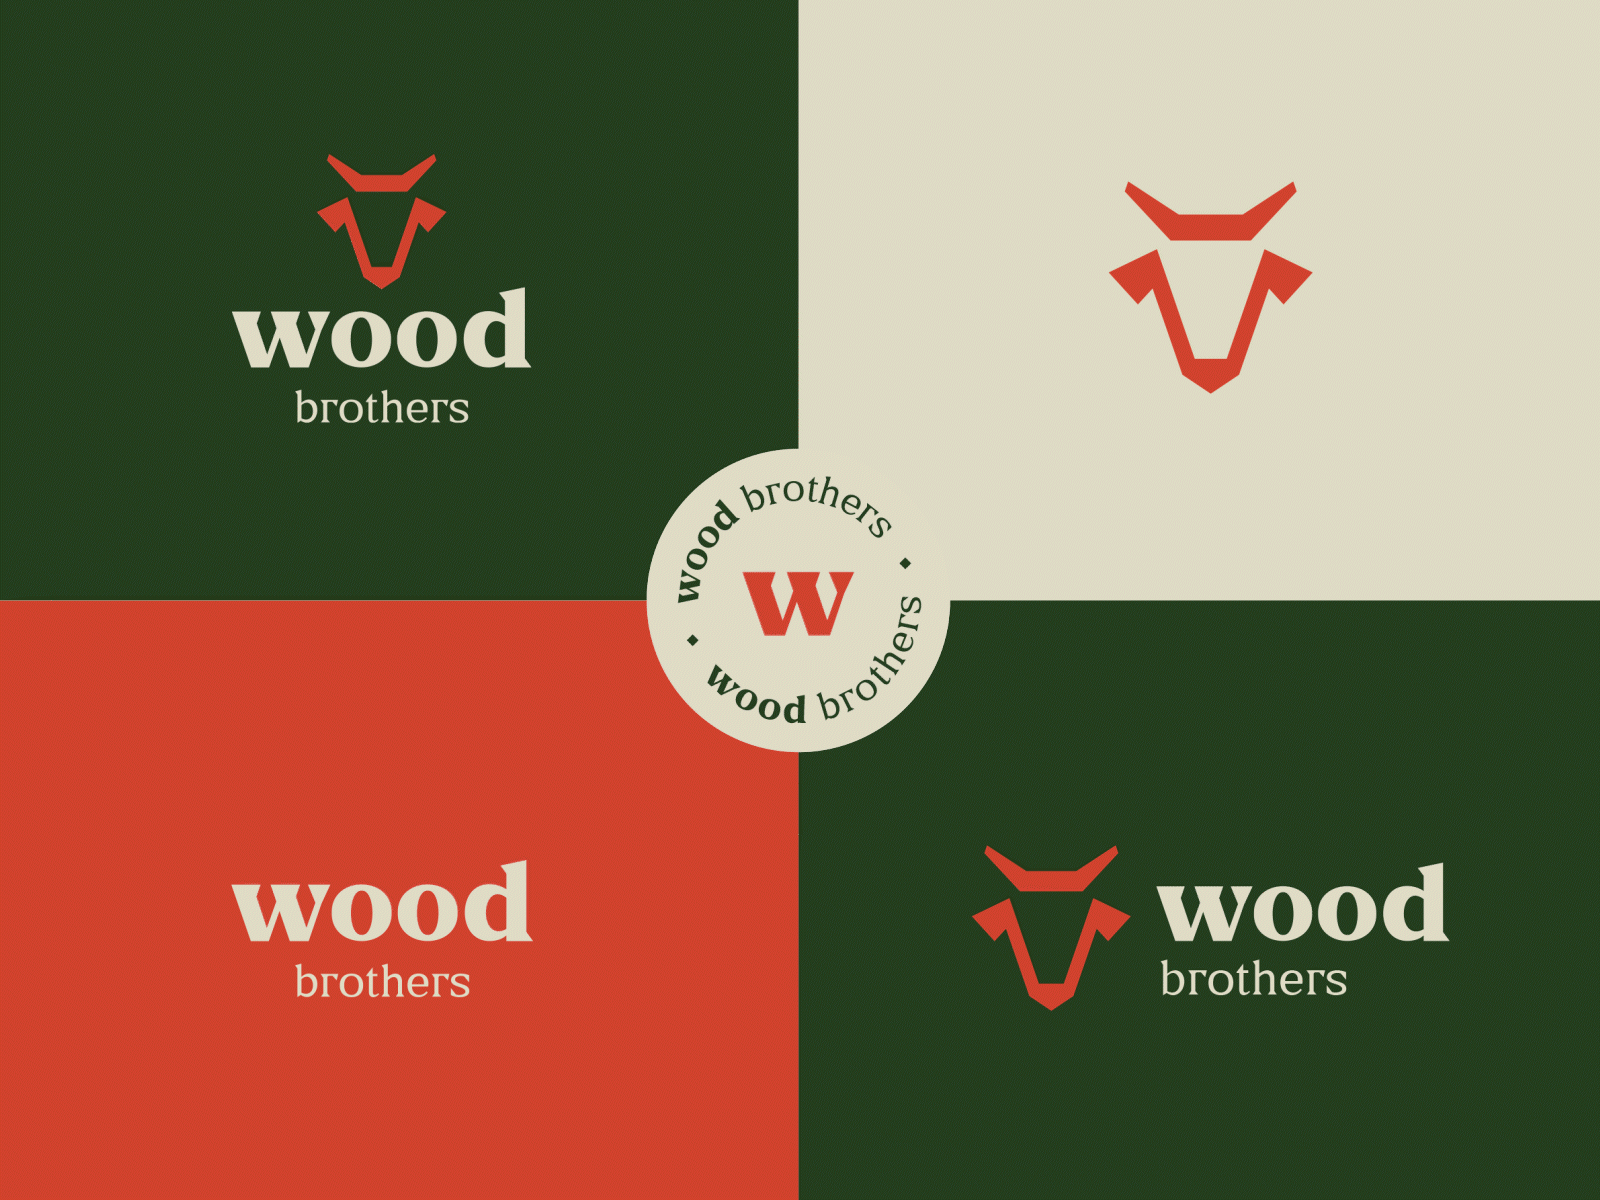 Wood Brothers - Brand System animation brand brand design brand system branding color palette colors graphic design green logo logotype motion graphics orange typography visual identity wood wood brothers